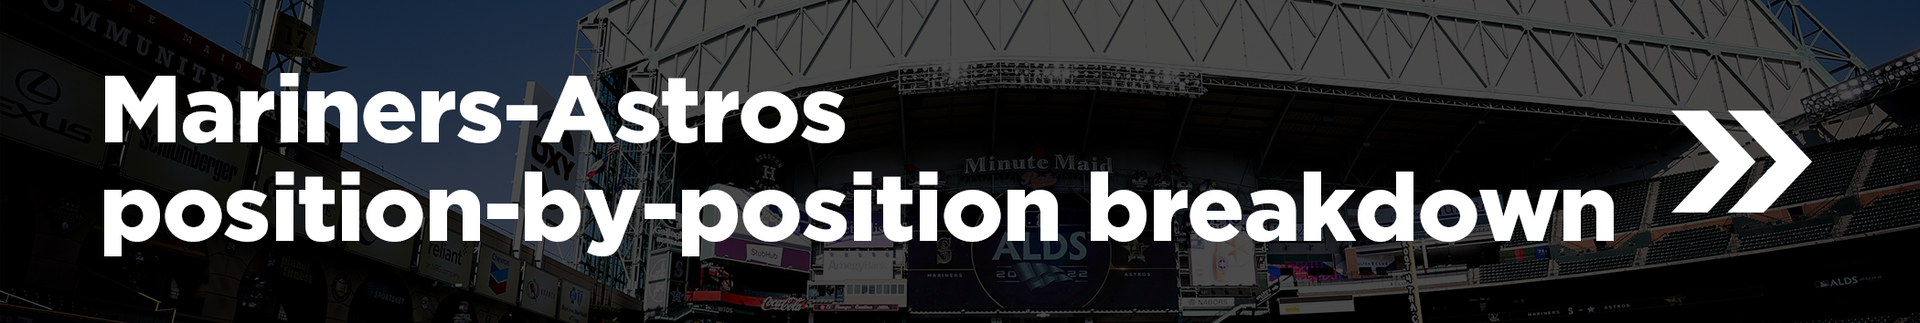 Mariners-Astros position-by-position breakdown